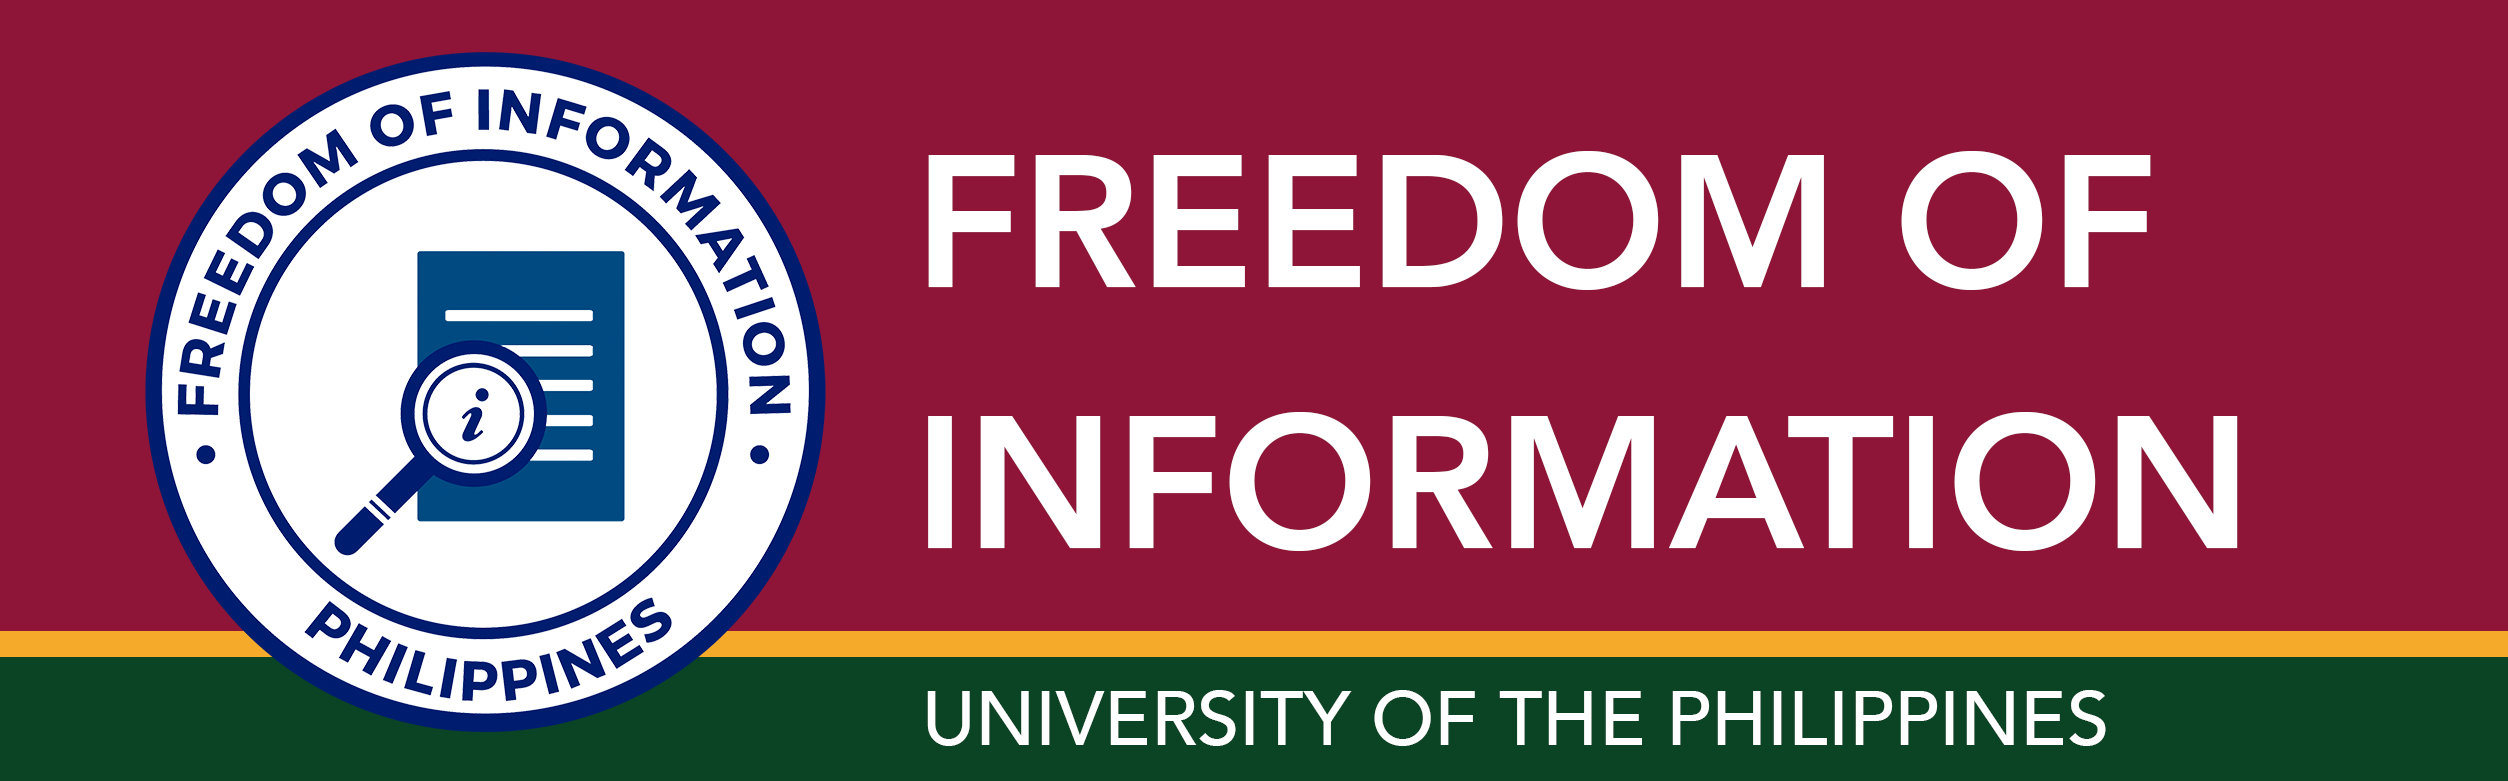 freedom_of_information